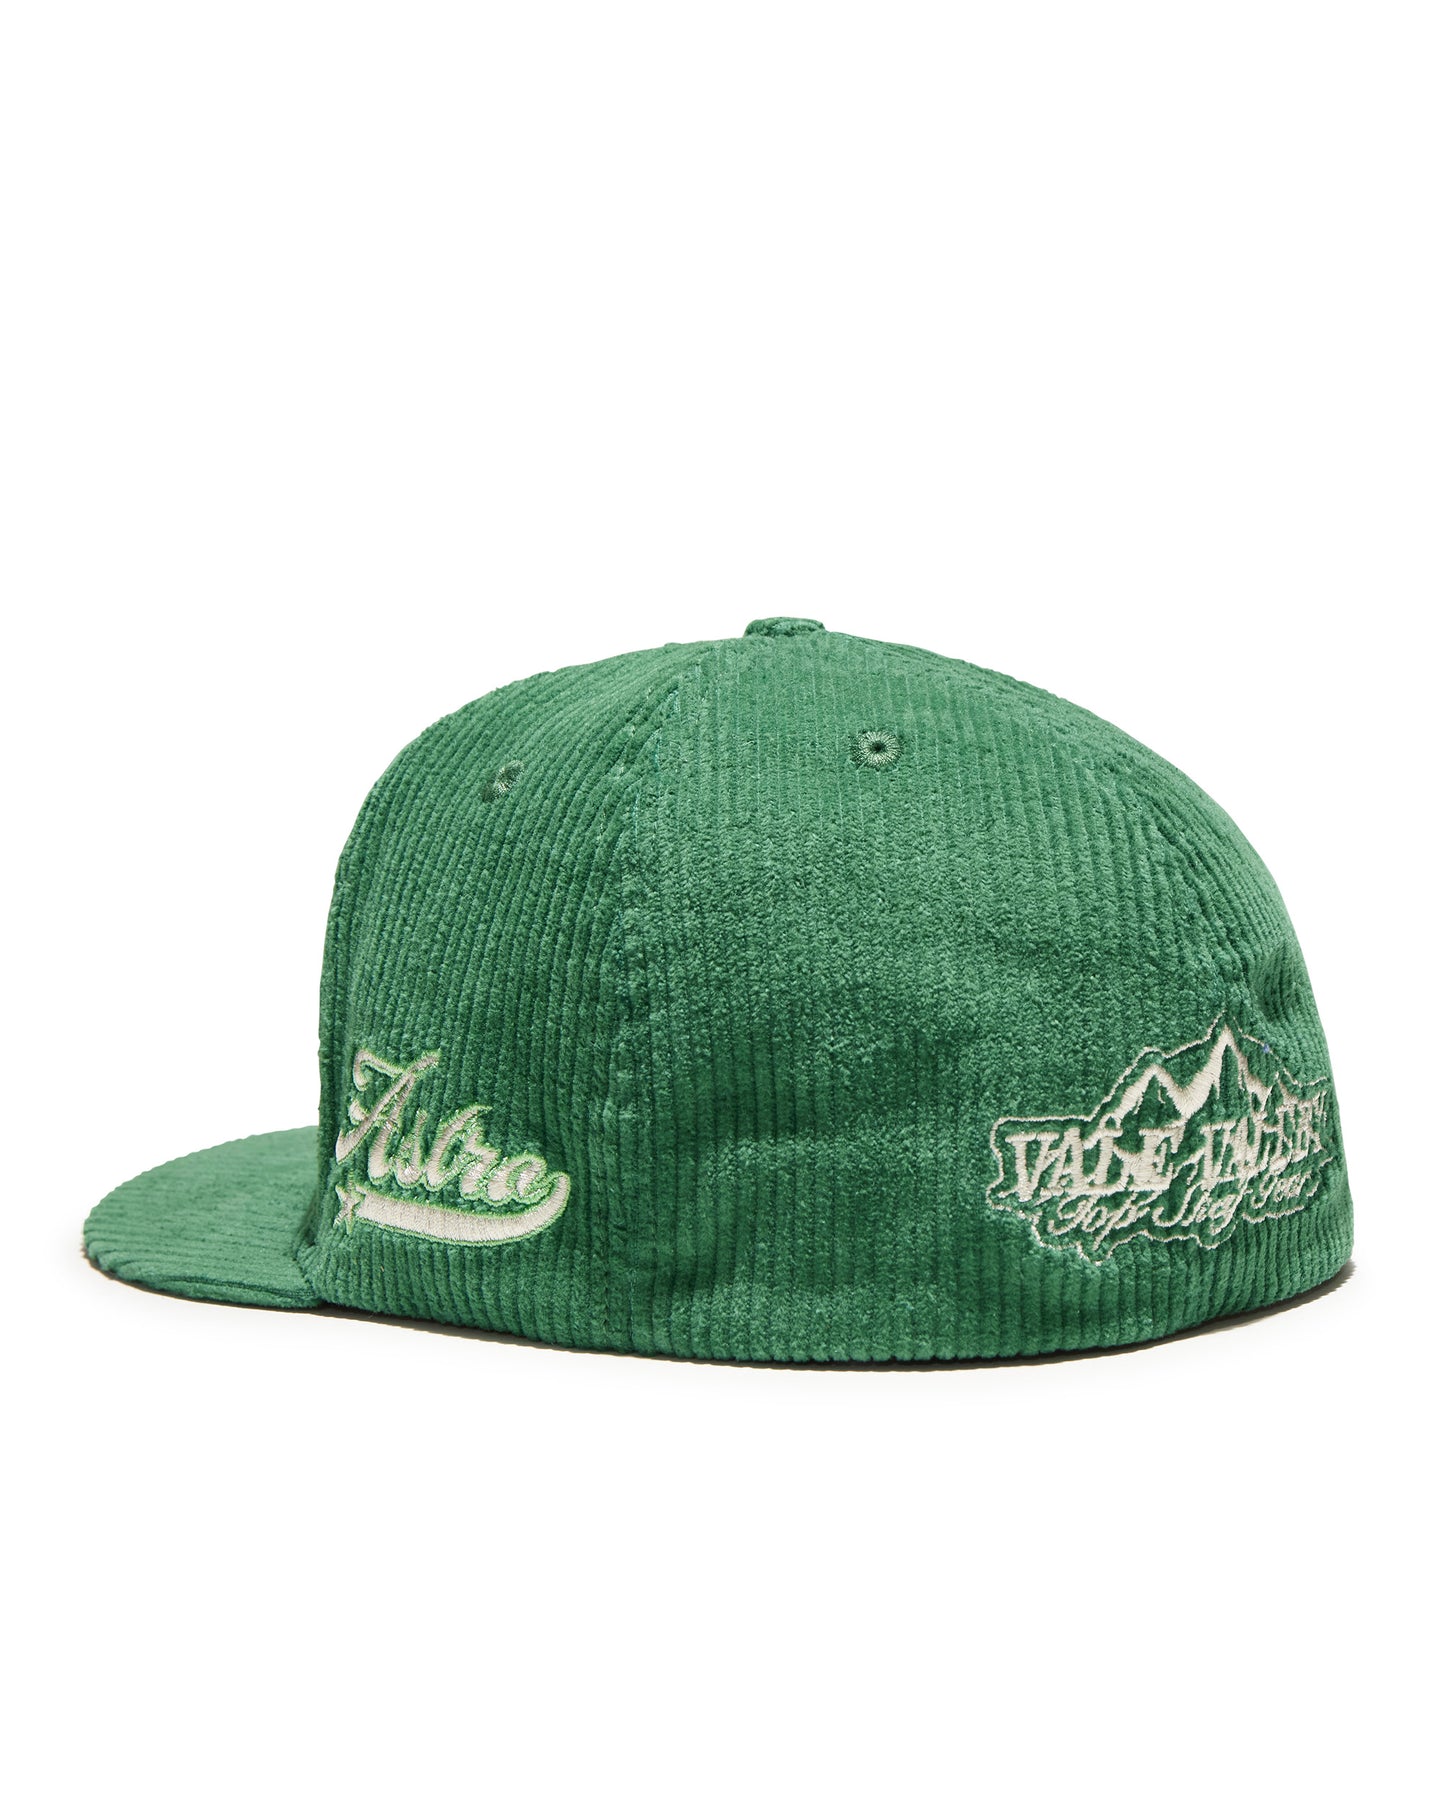 VS FOREST FITTED CAP